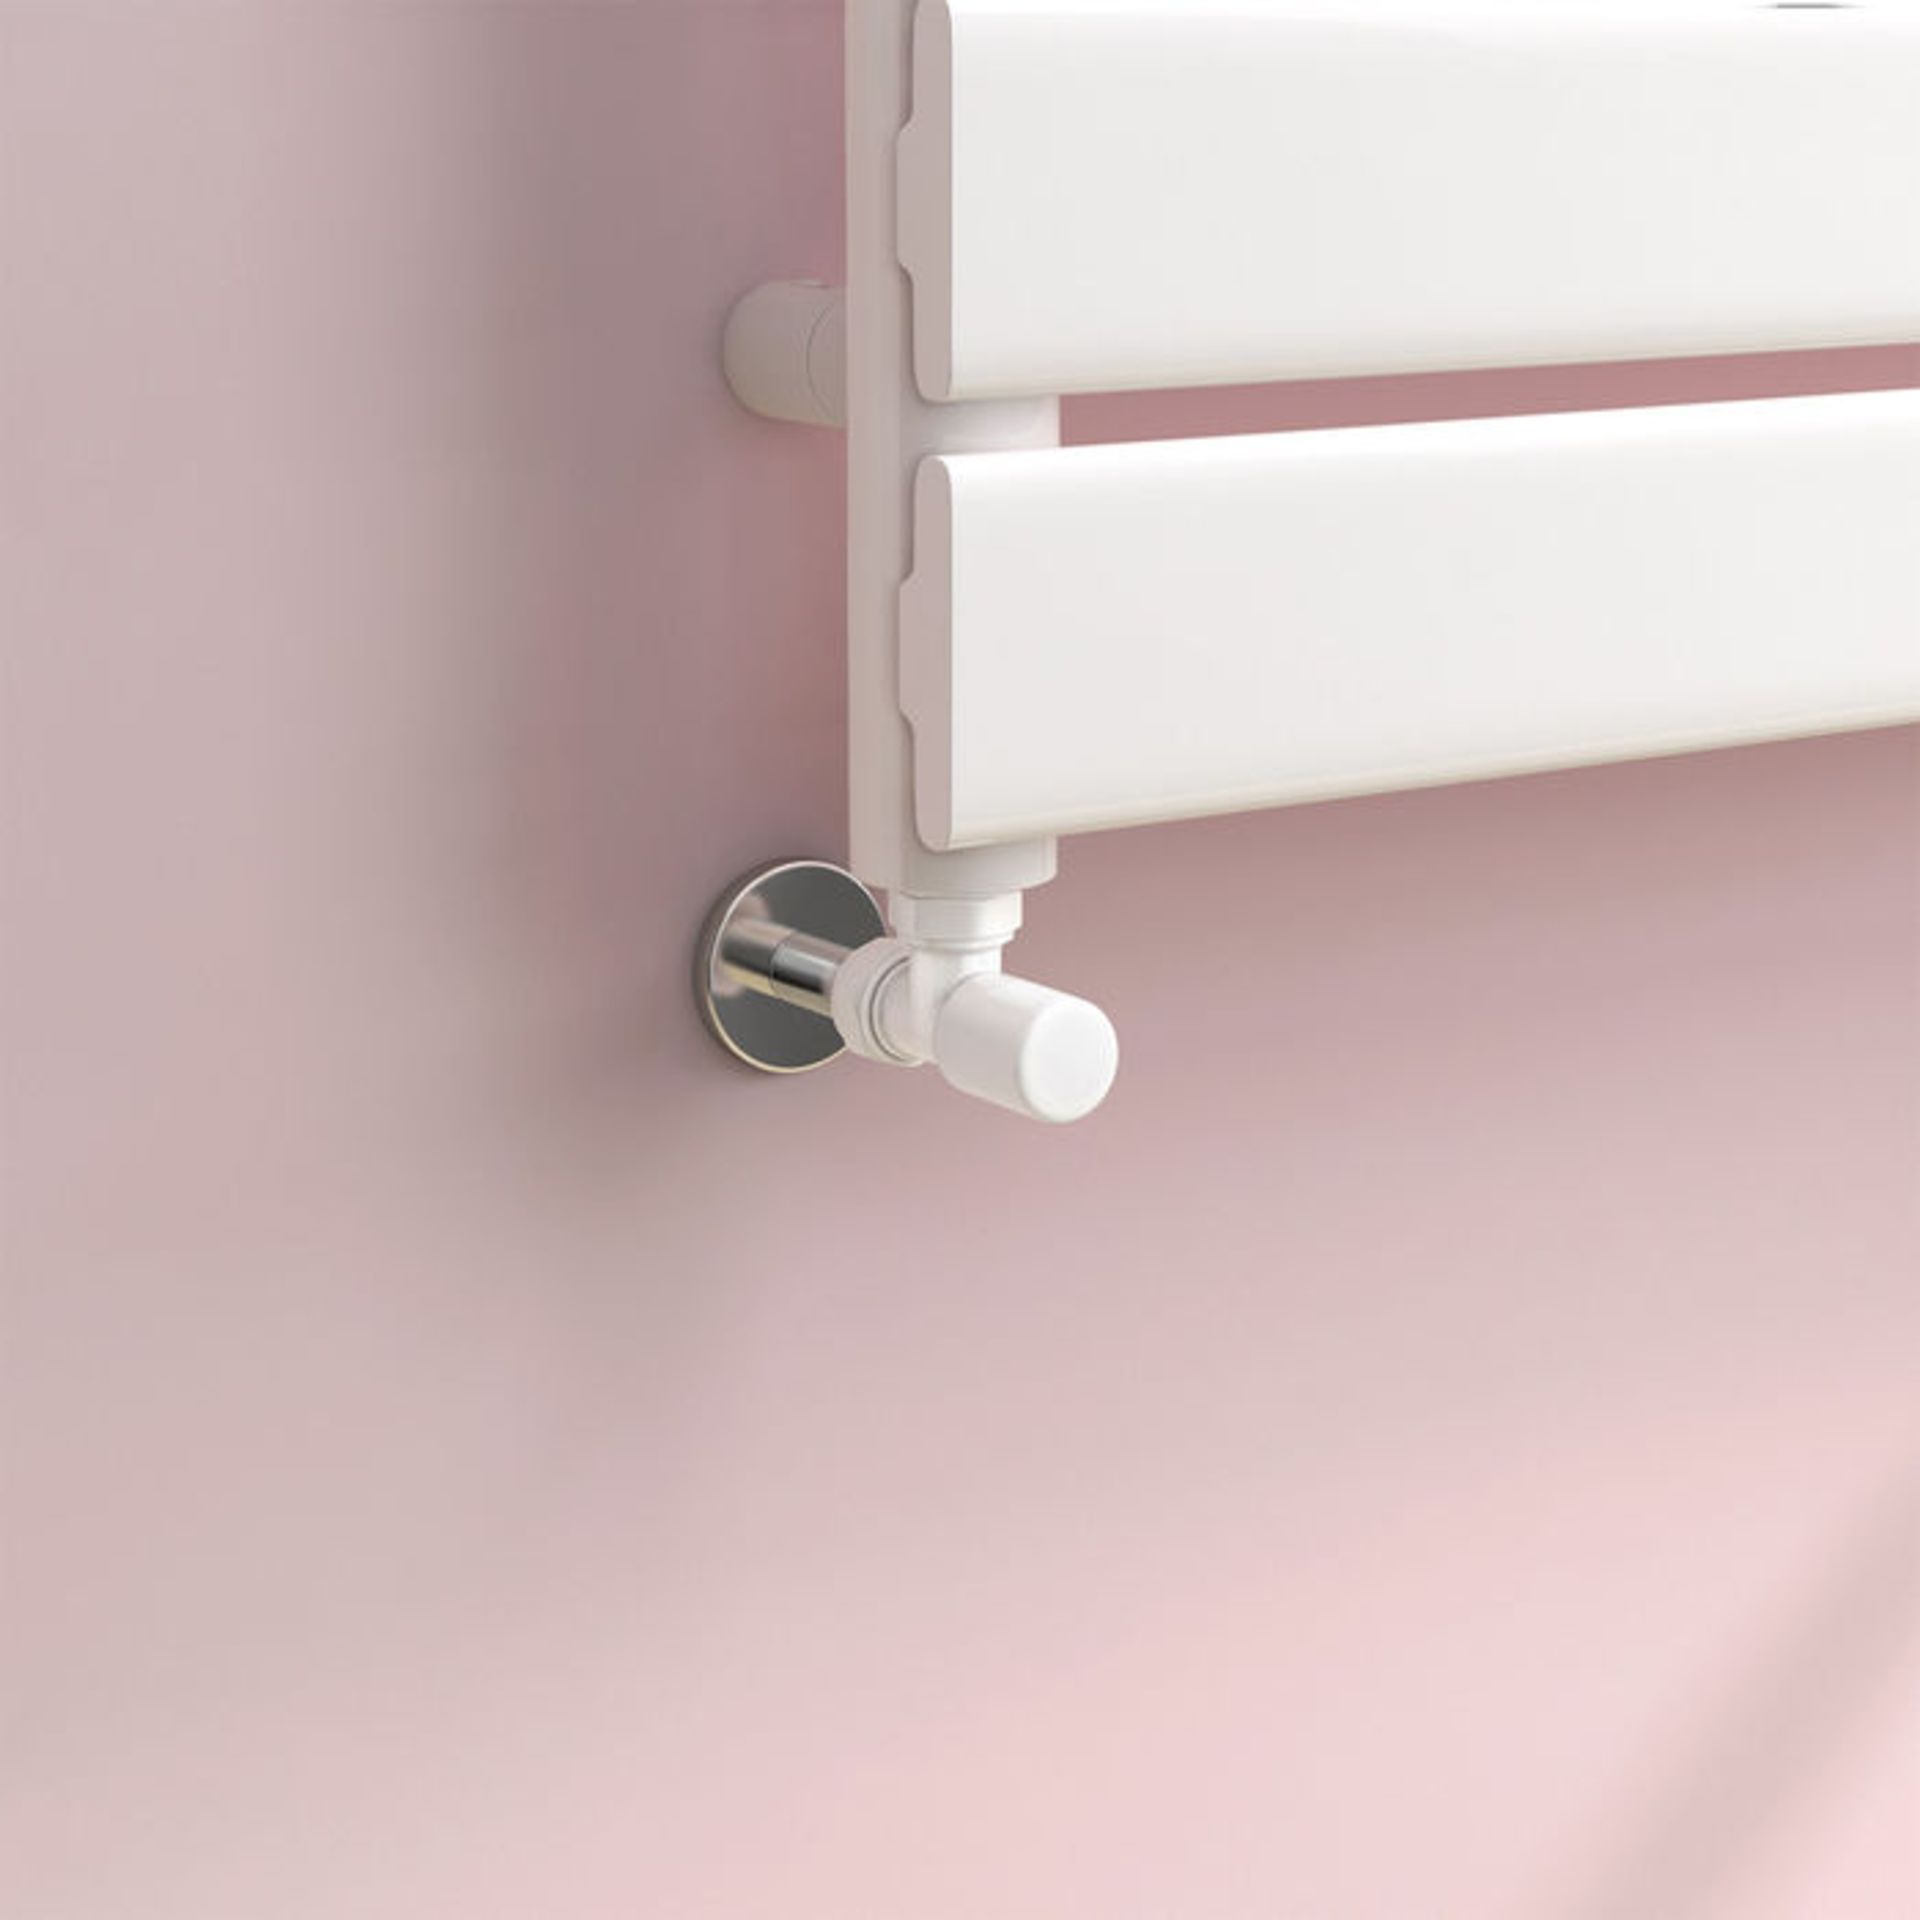 (YC230) 15mm Standard Connection Angled Gloss White Radiator Valves Solid brass construct Angled - Image 3 of 3